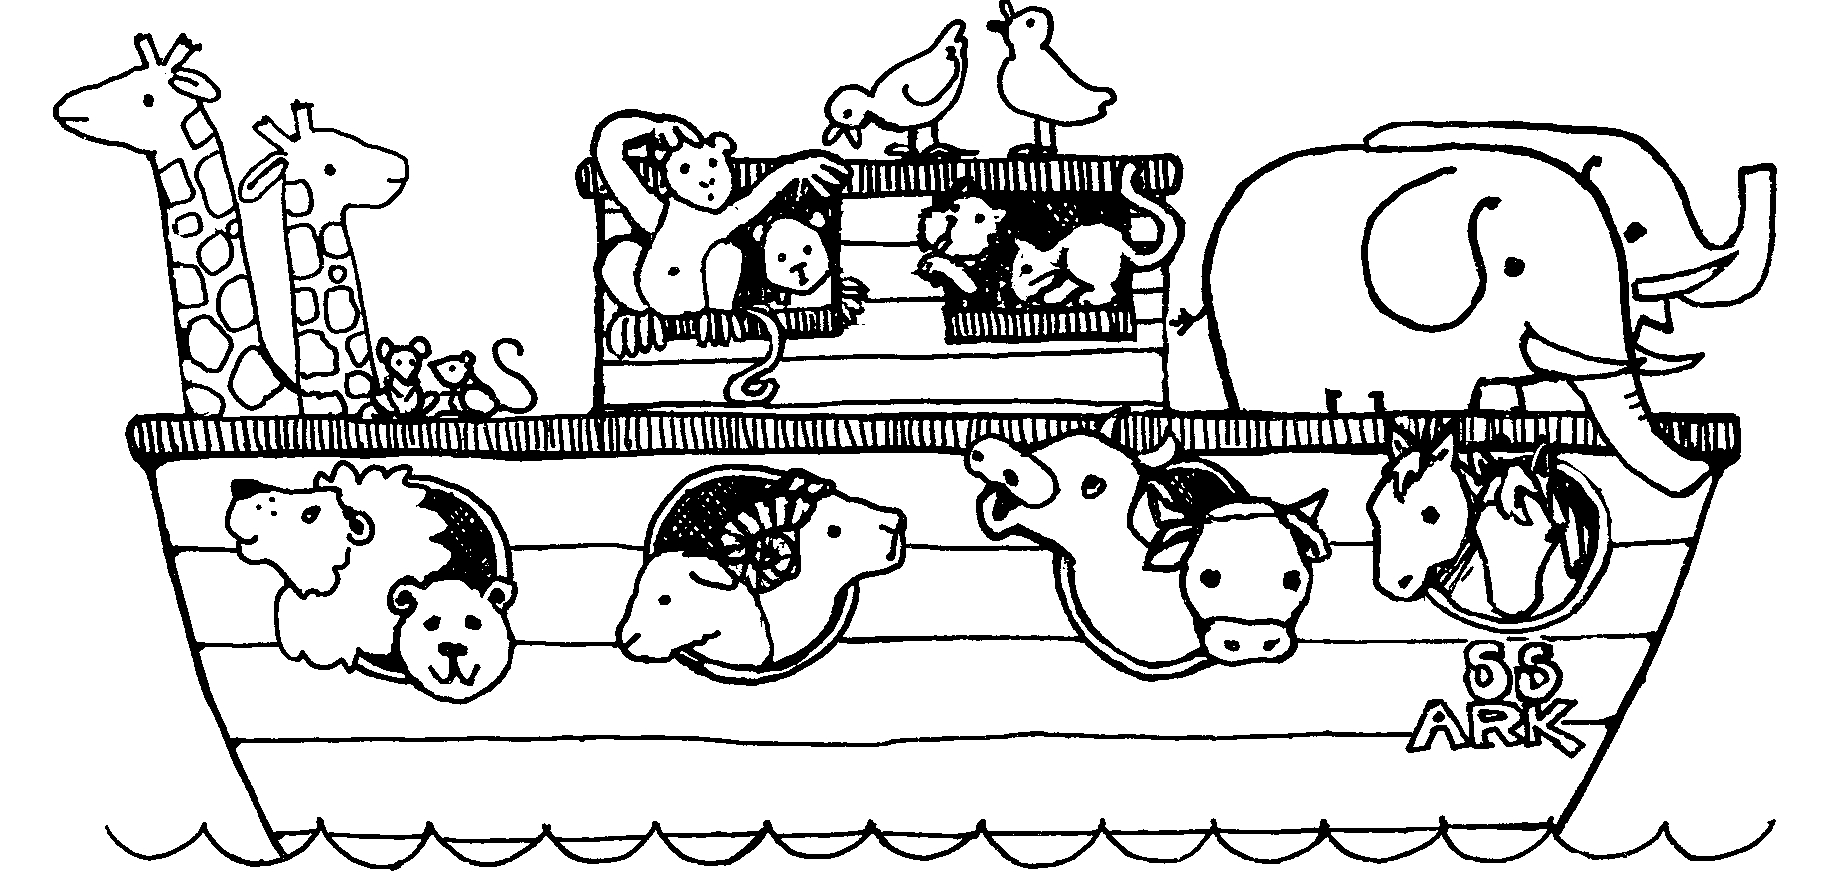 Noah ark coloring pages to download and print for free